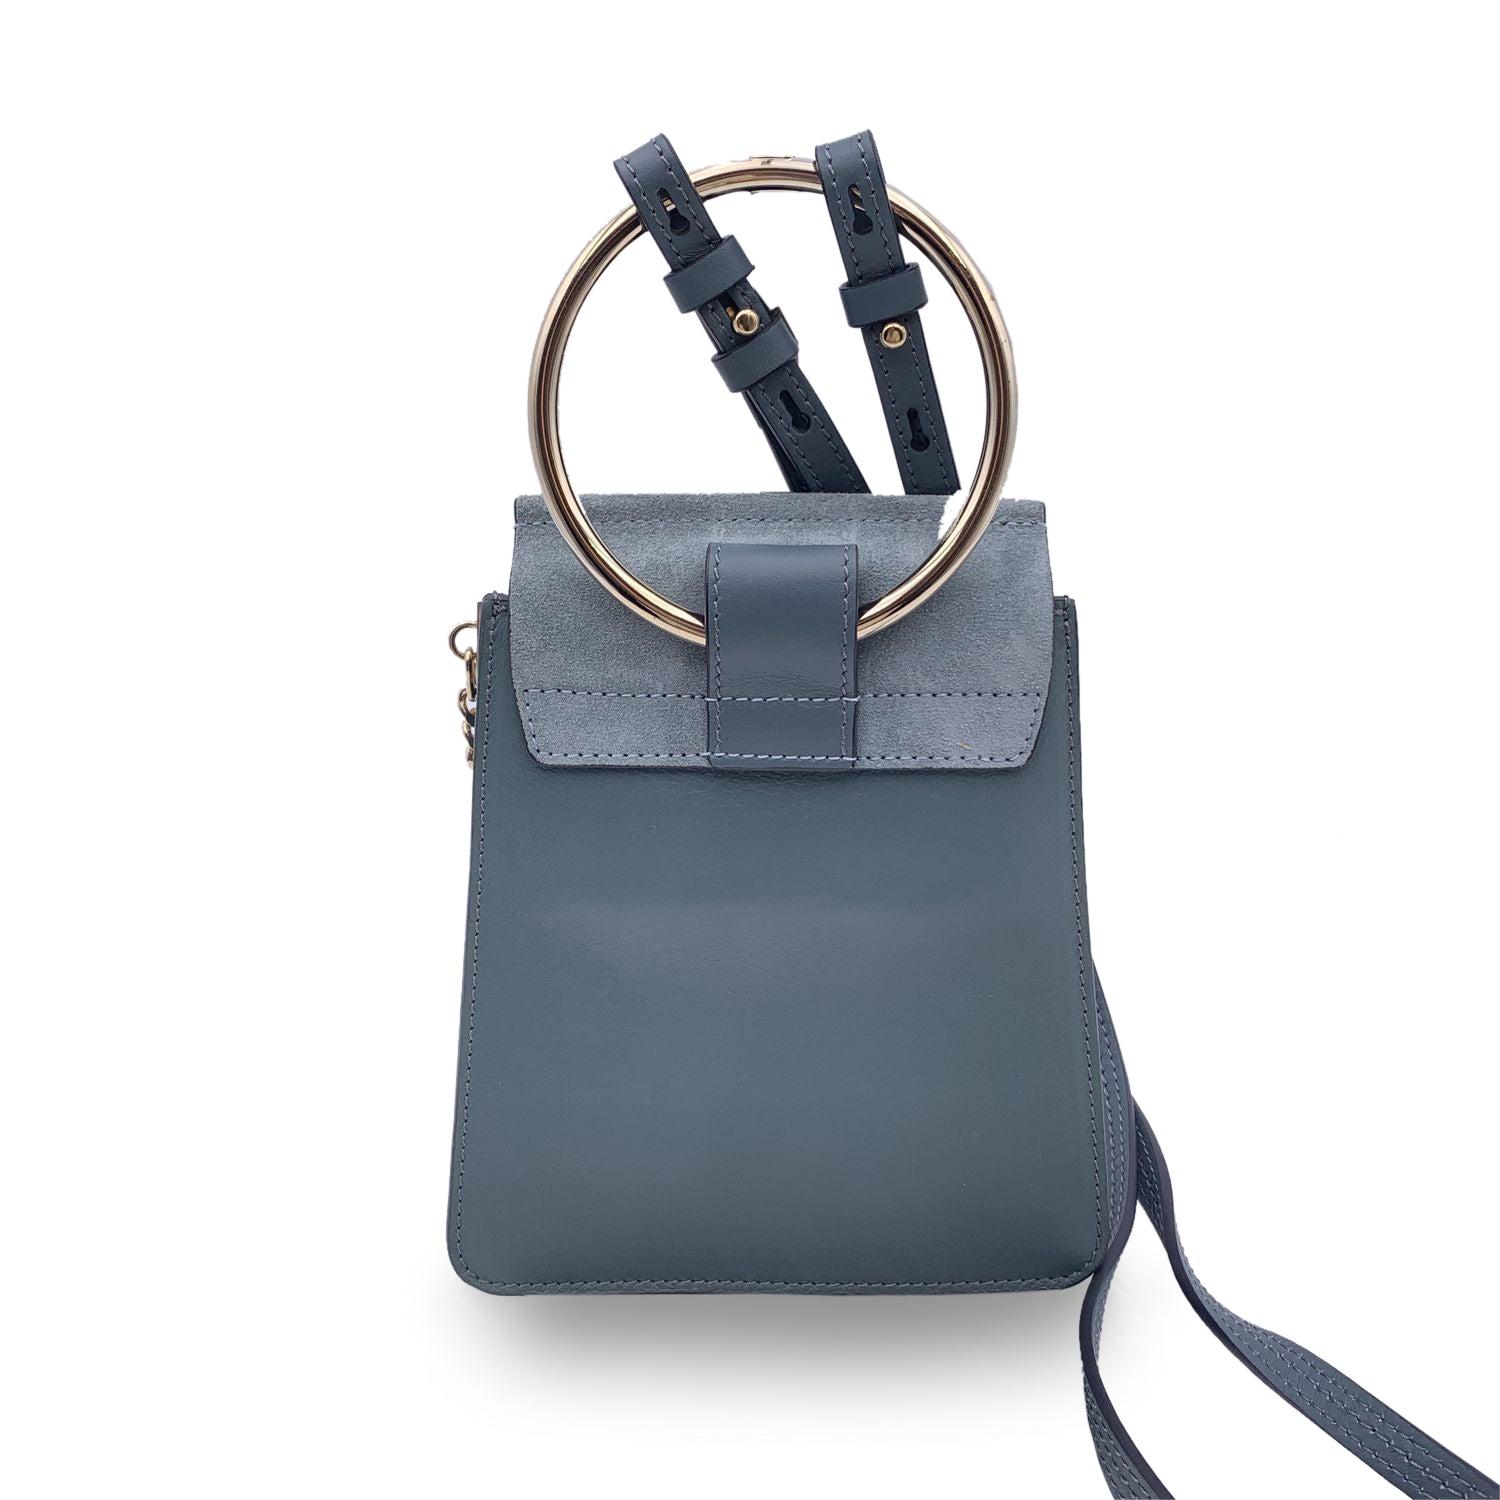 This beautiful Bag will come with a Certificate of Authenticity provided by Entrupy. The certificate will be provided at no further cost. Chloé Faye shoulder bag in light blue suede and leather. The Faye was created for the 2015 spring/summer